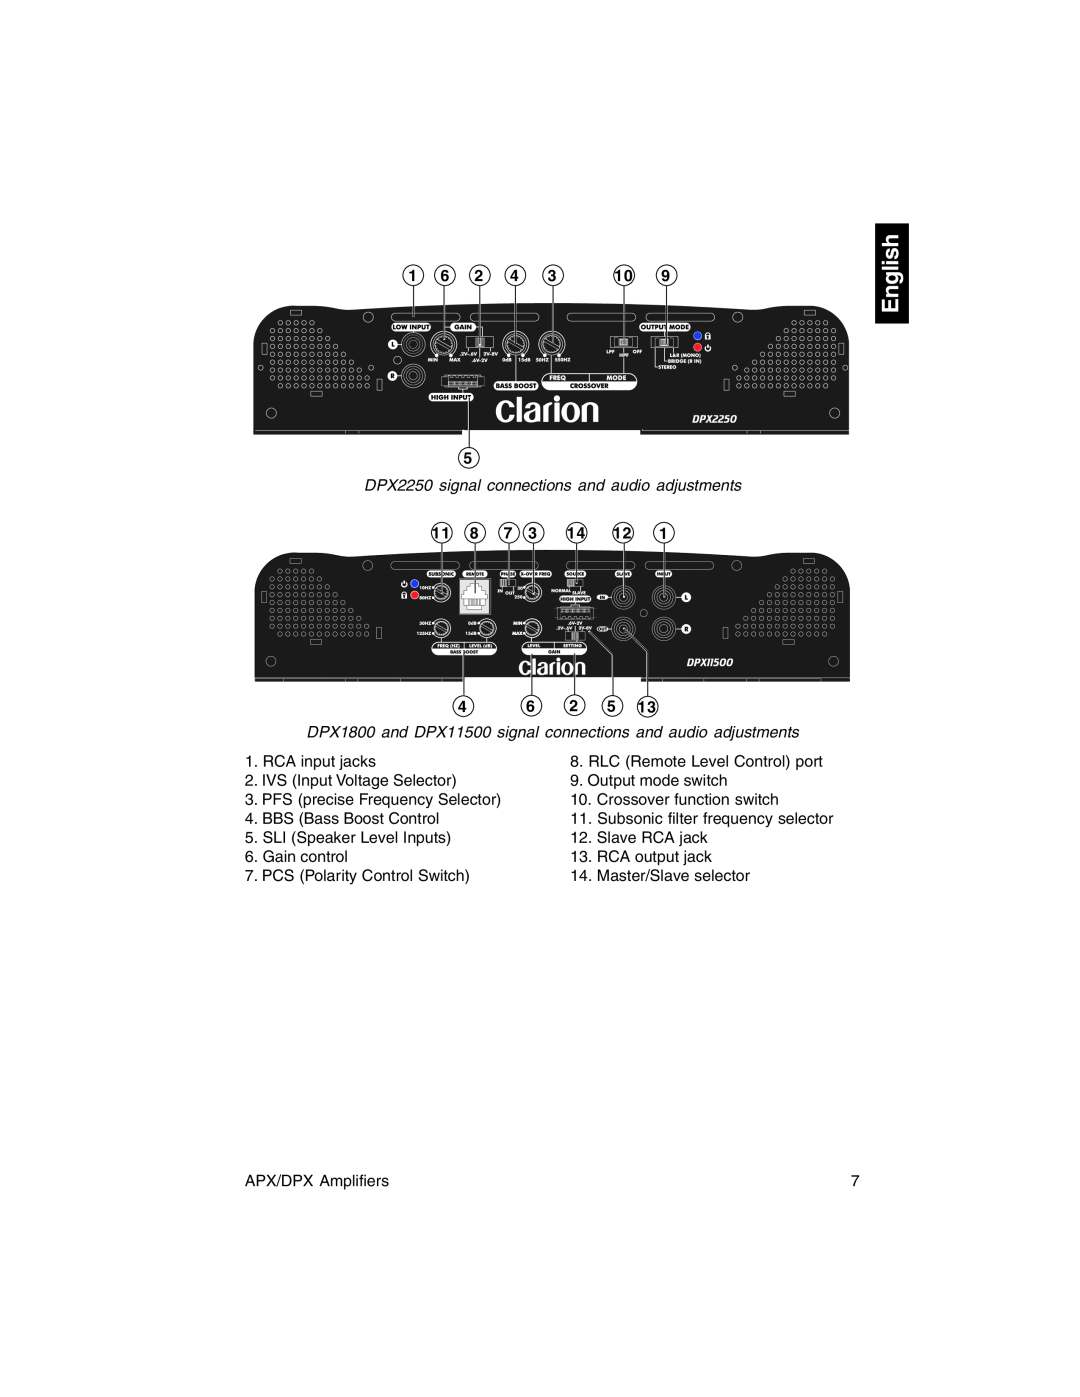 Clarion APX2180, DPX1800, DPX11500, APX4360 owner manual English, DPX2250 signal connections and audio adjustments 